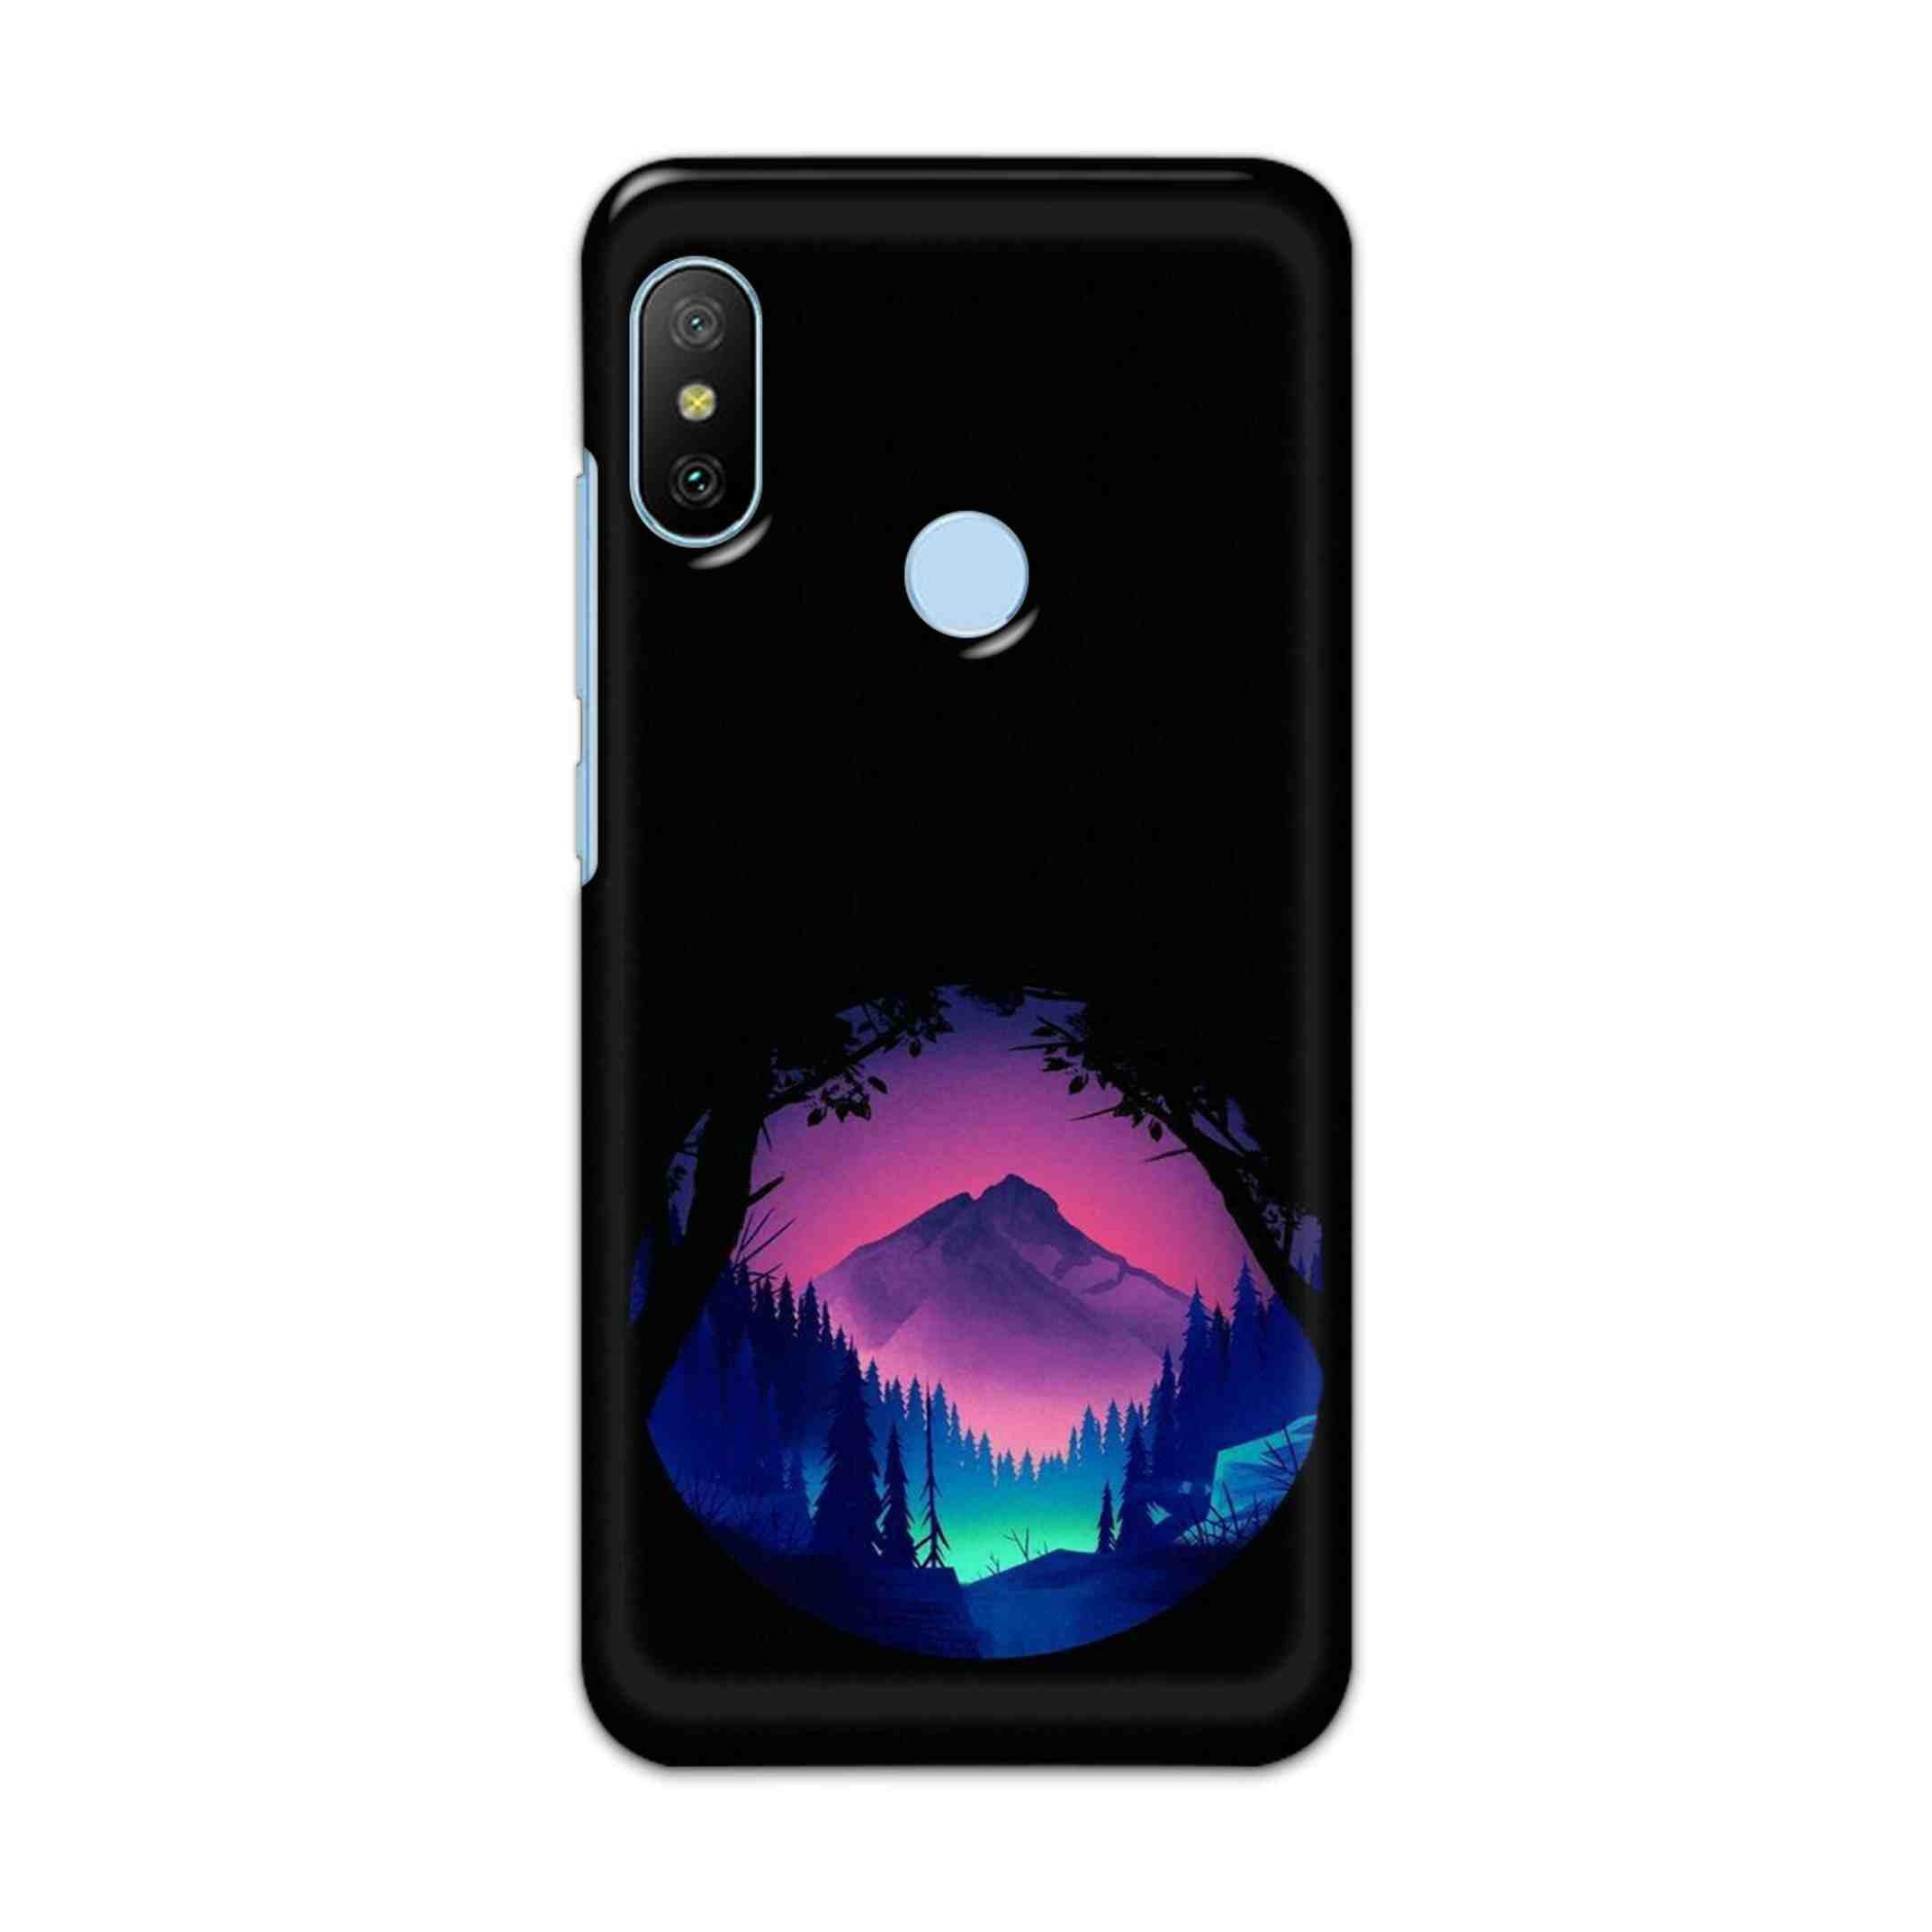 Buy Neon Teables Hard Back Mobile Phone Case/Cover For Xiaomi Redmi 6 Pro Online